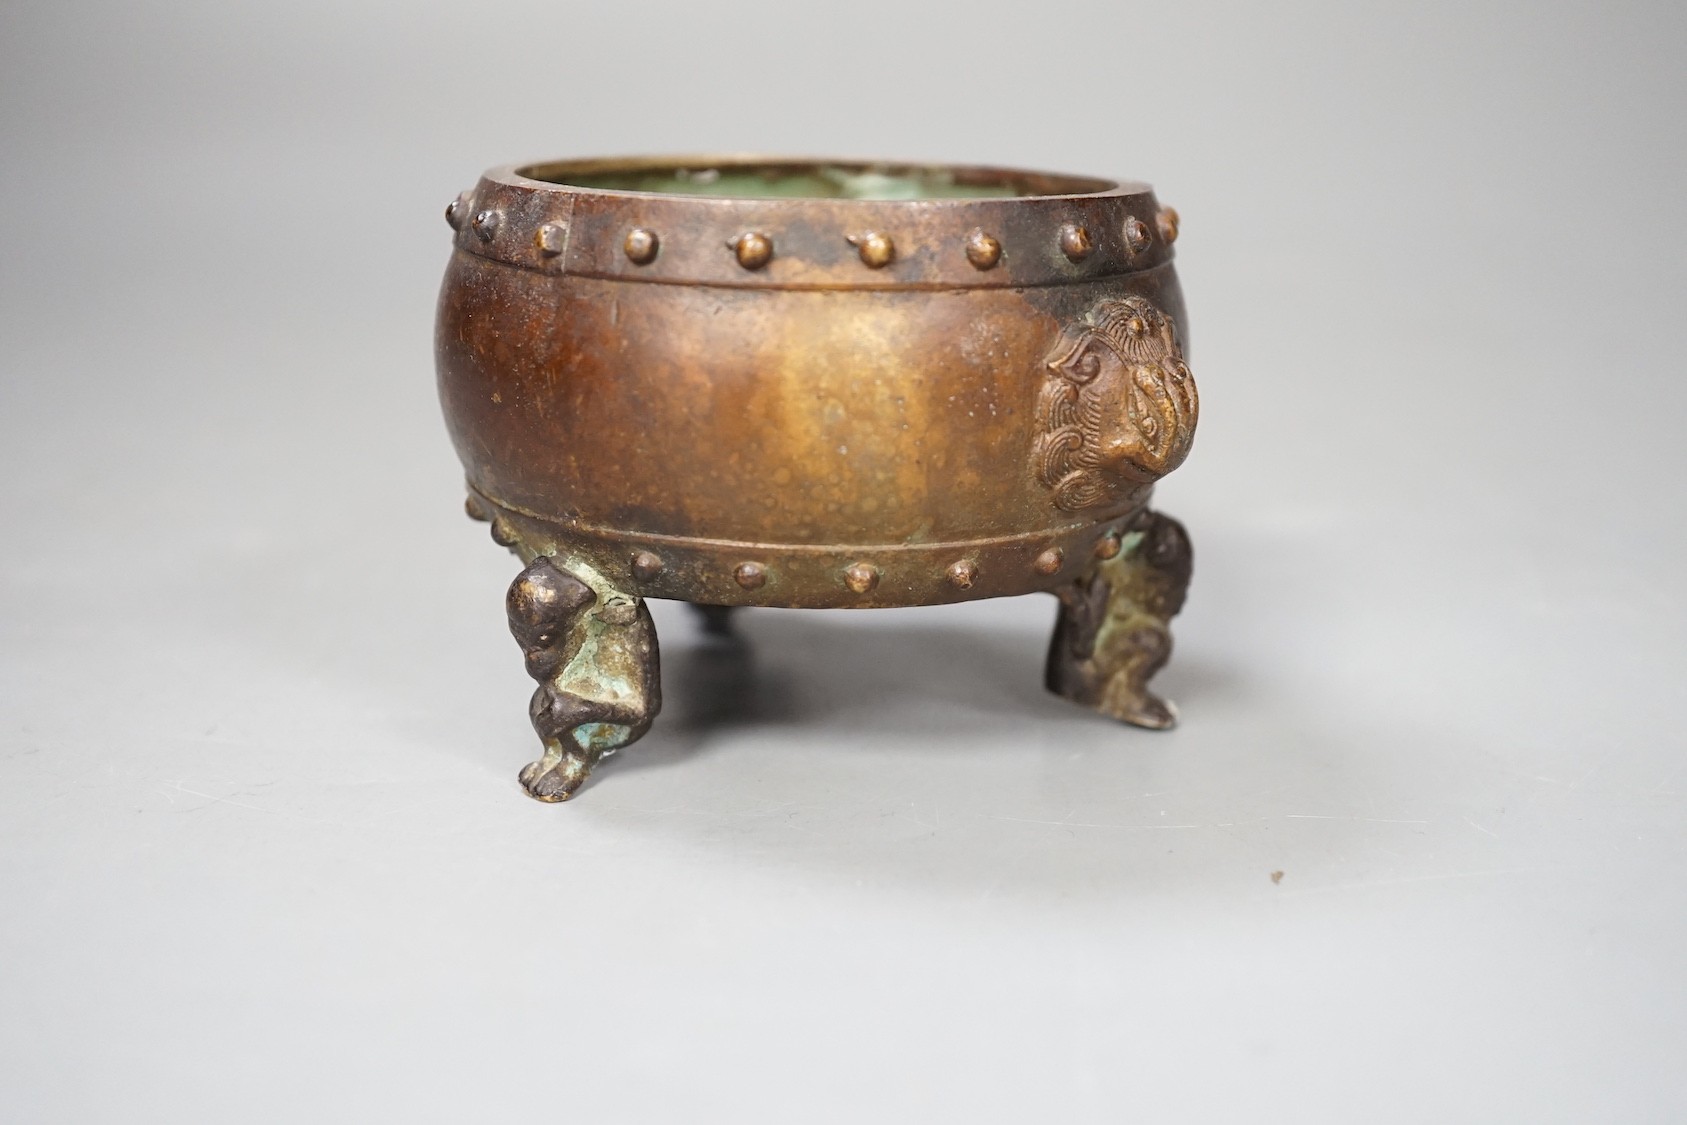 A Chinese bronze tripod censer, Xuande mark - 7cm tall